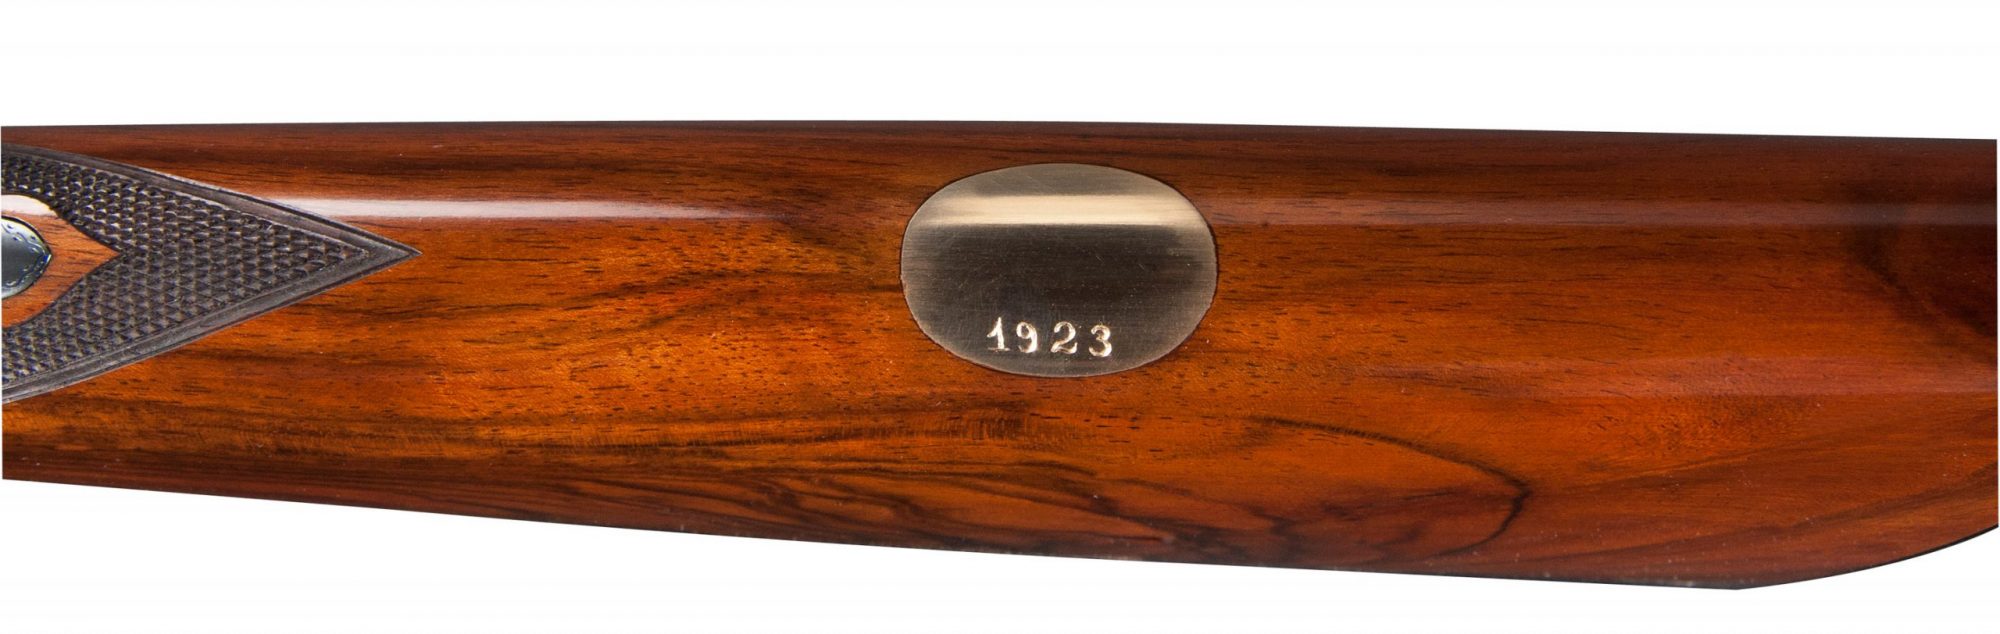 Photo of a restored Parker BHE 12 gauge shotgun by Turnbull Restoration of Bloomfield, NY